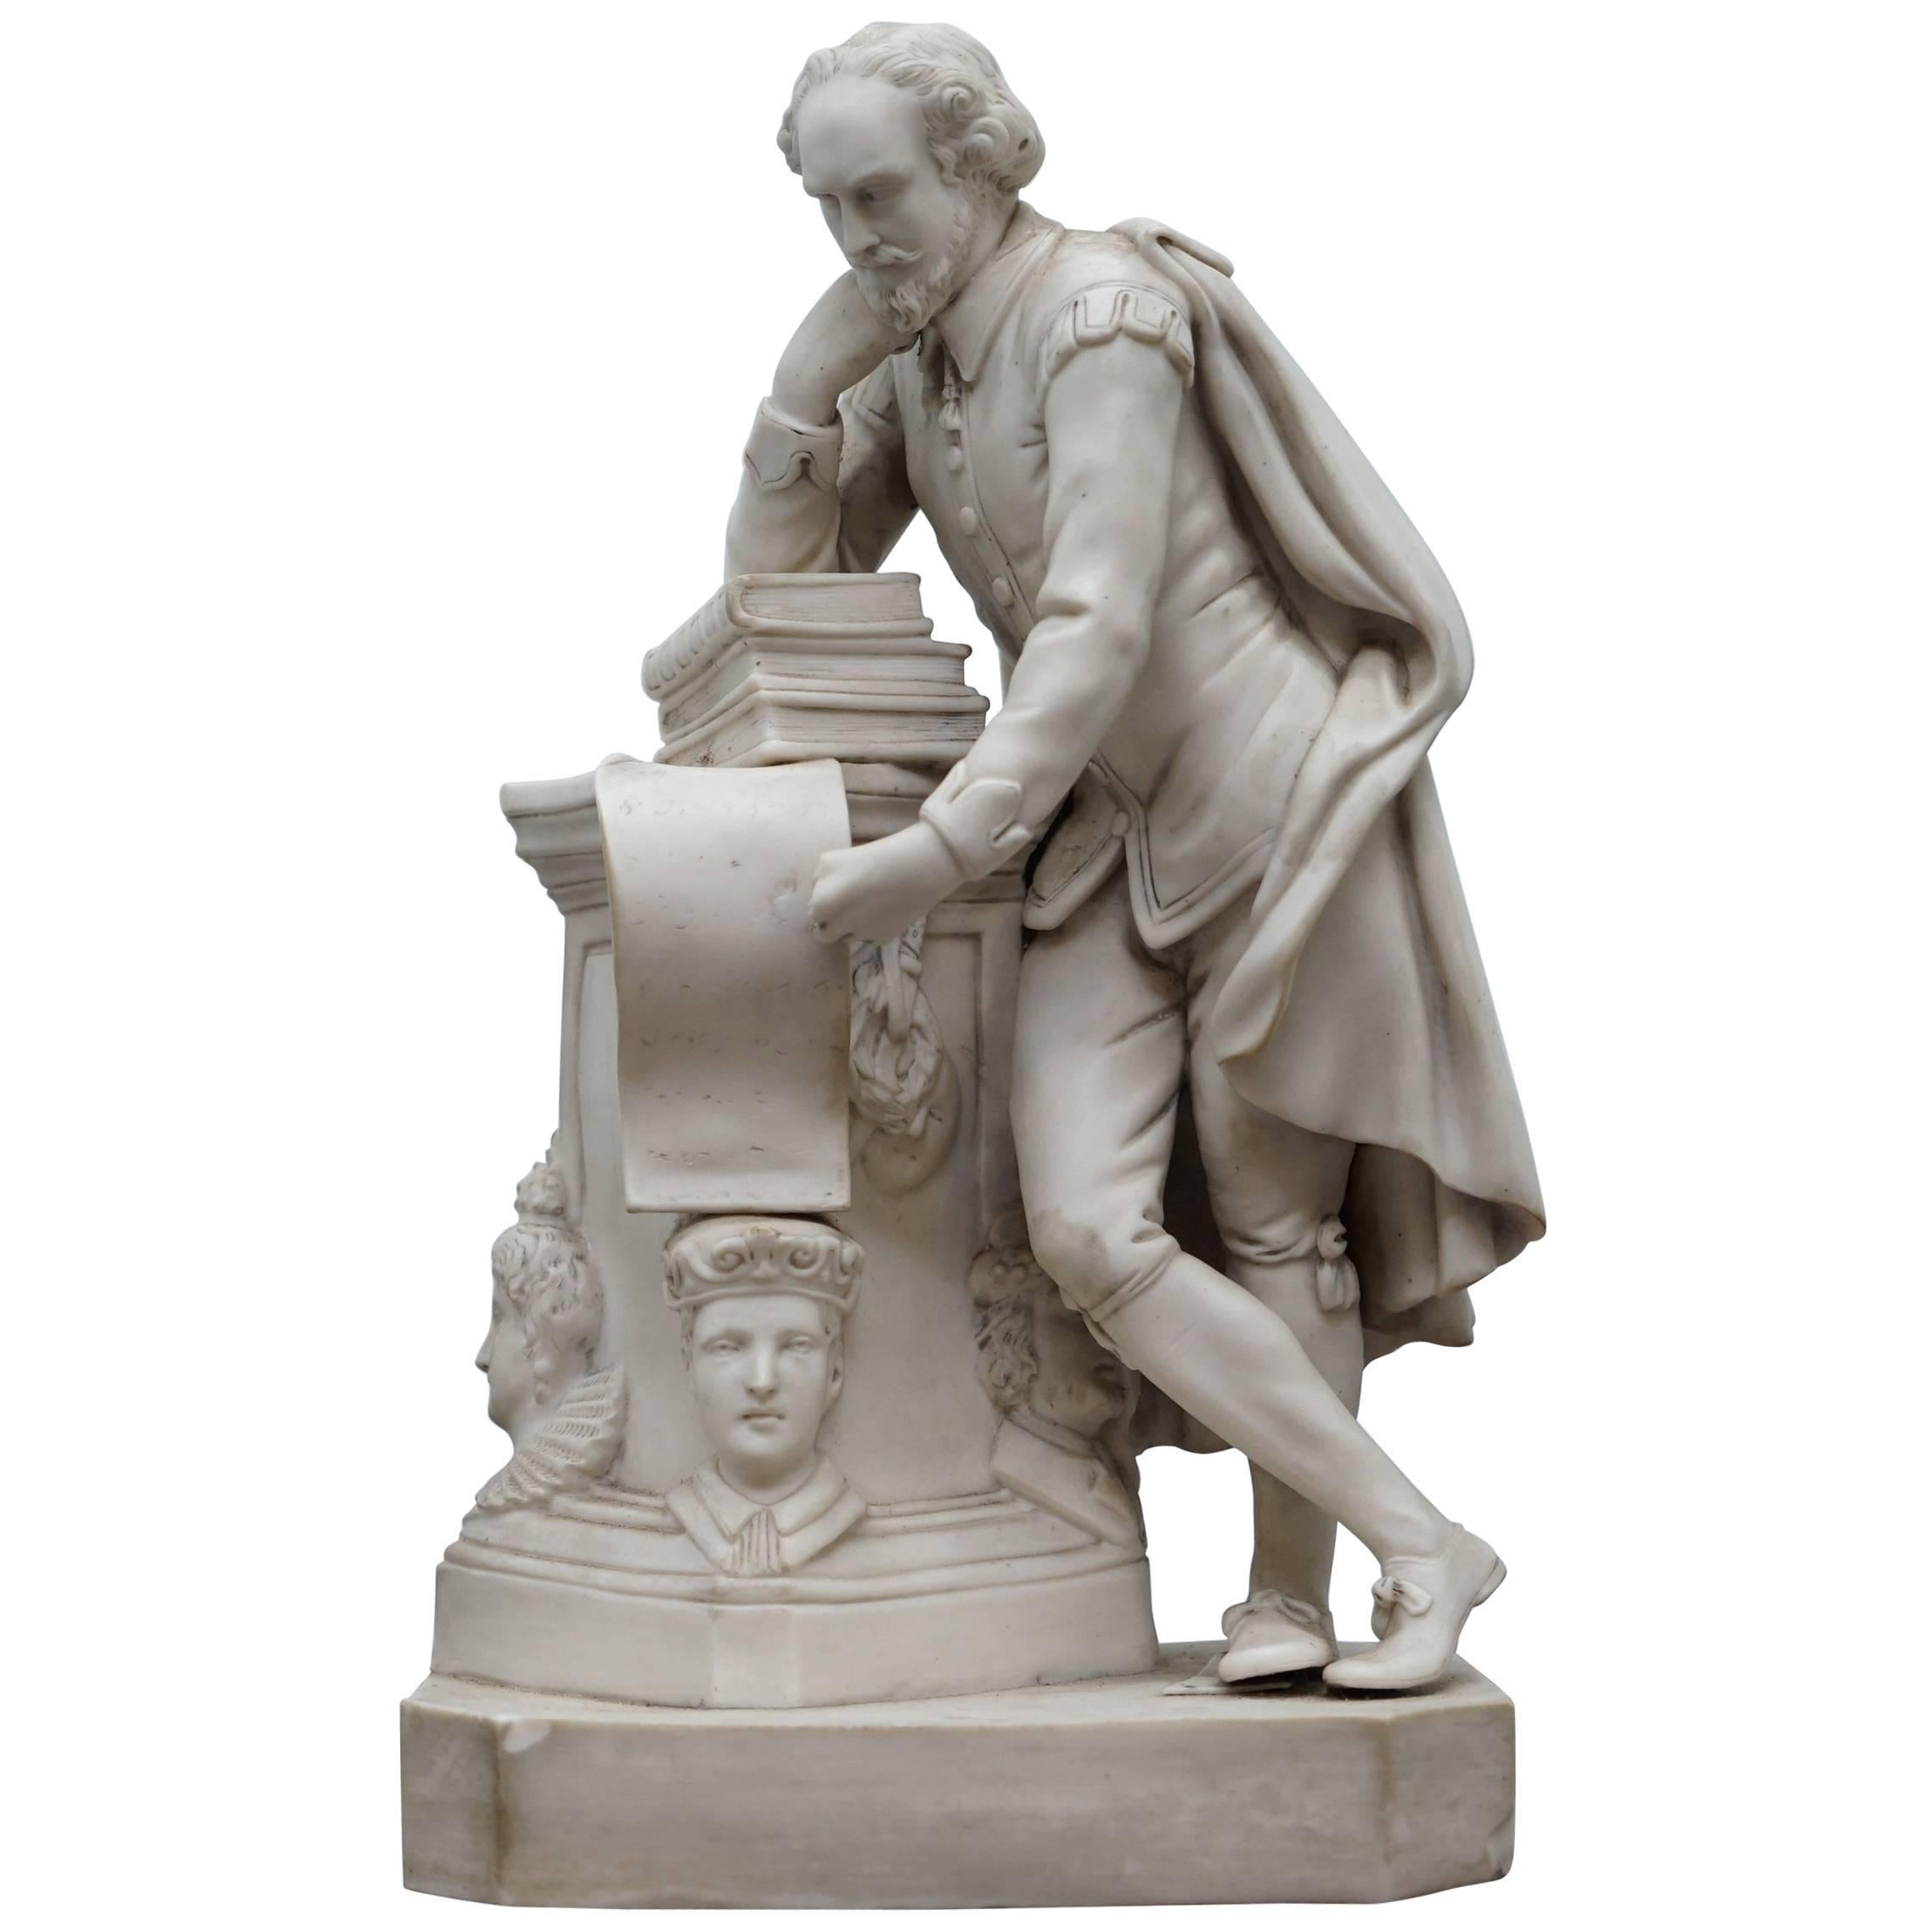 Highly Detailed Parian Marble Statue of William Shakespeare Must See, circa 1860